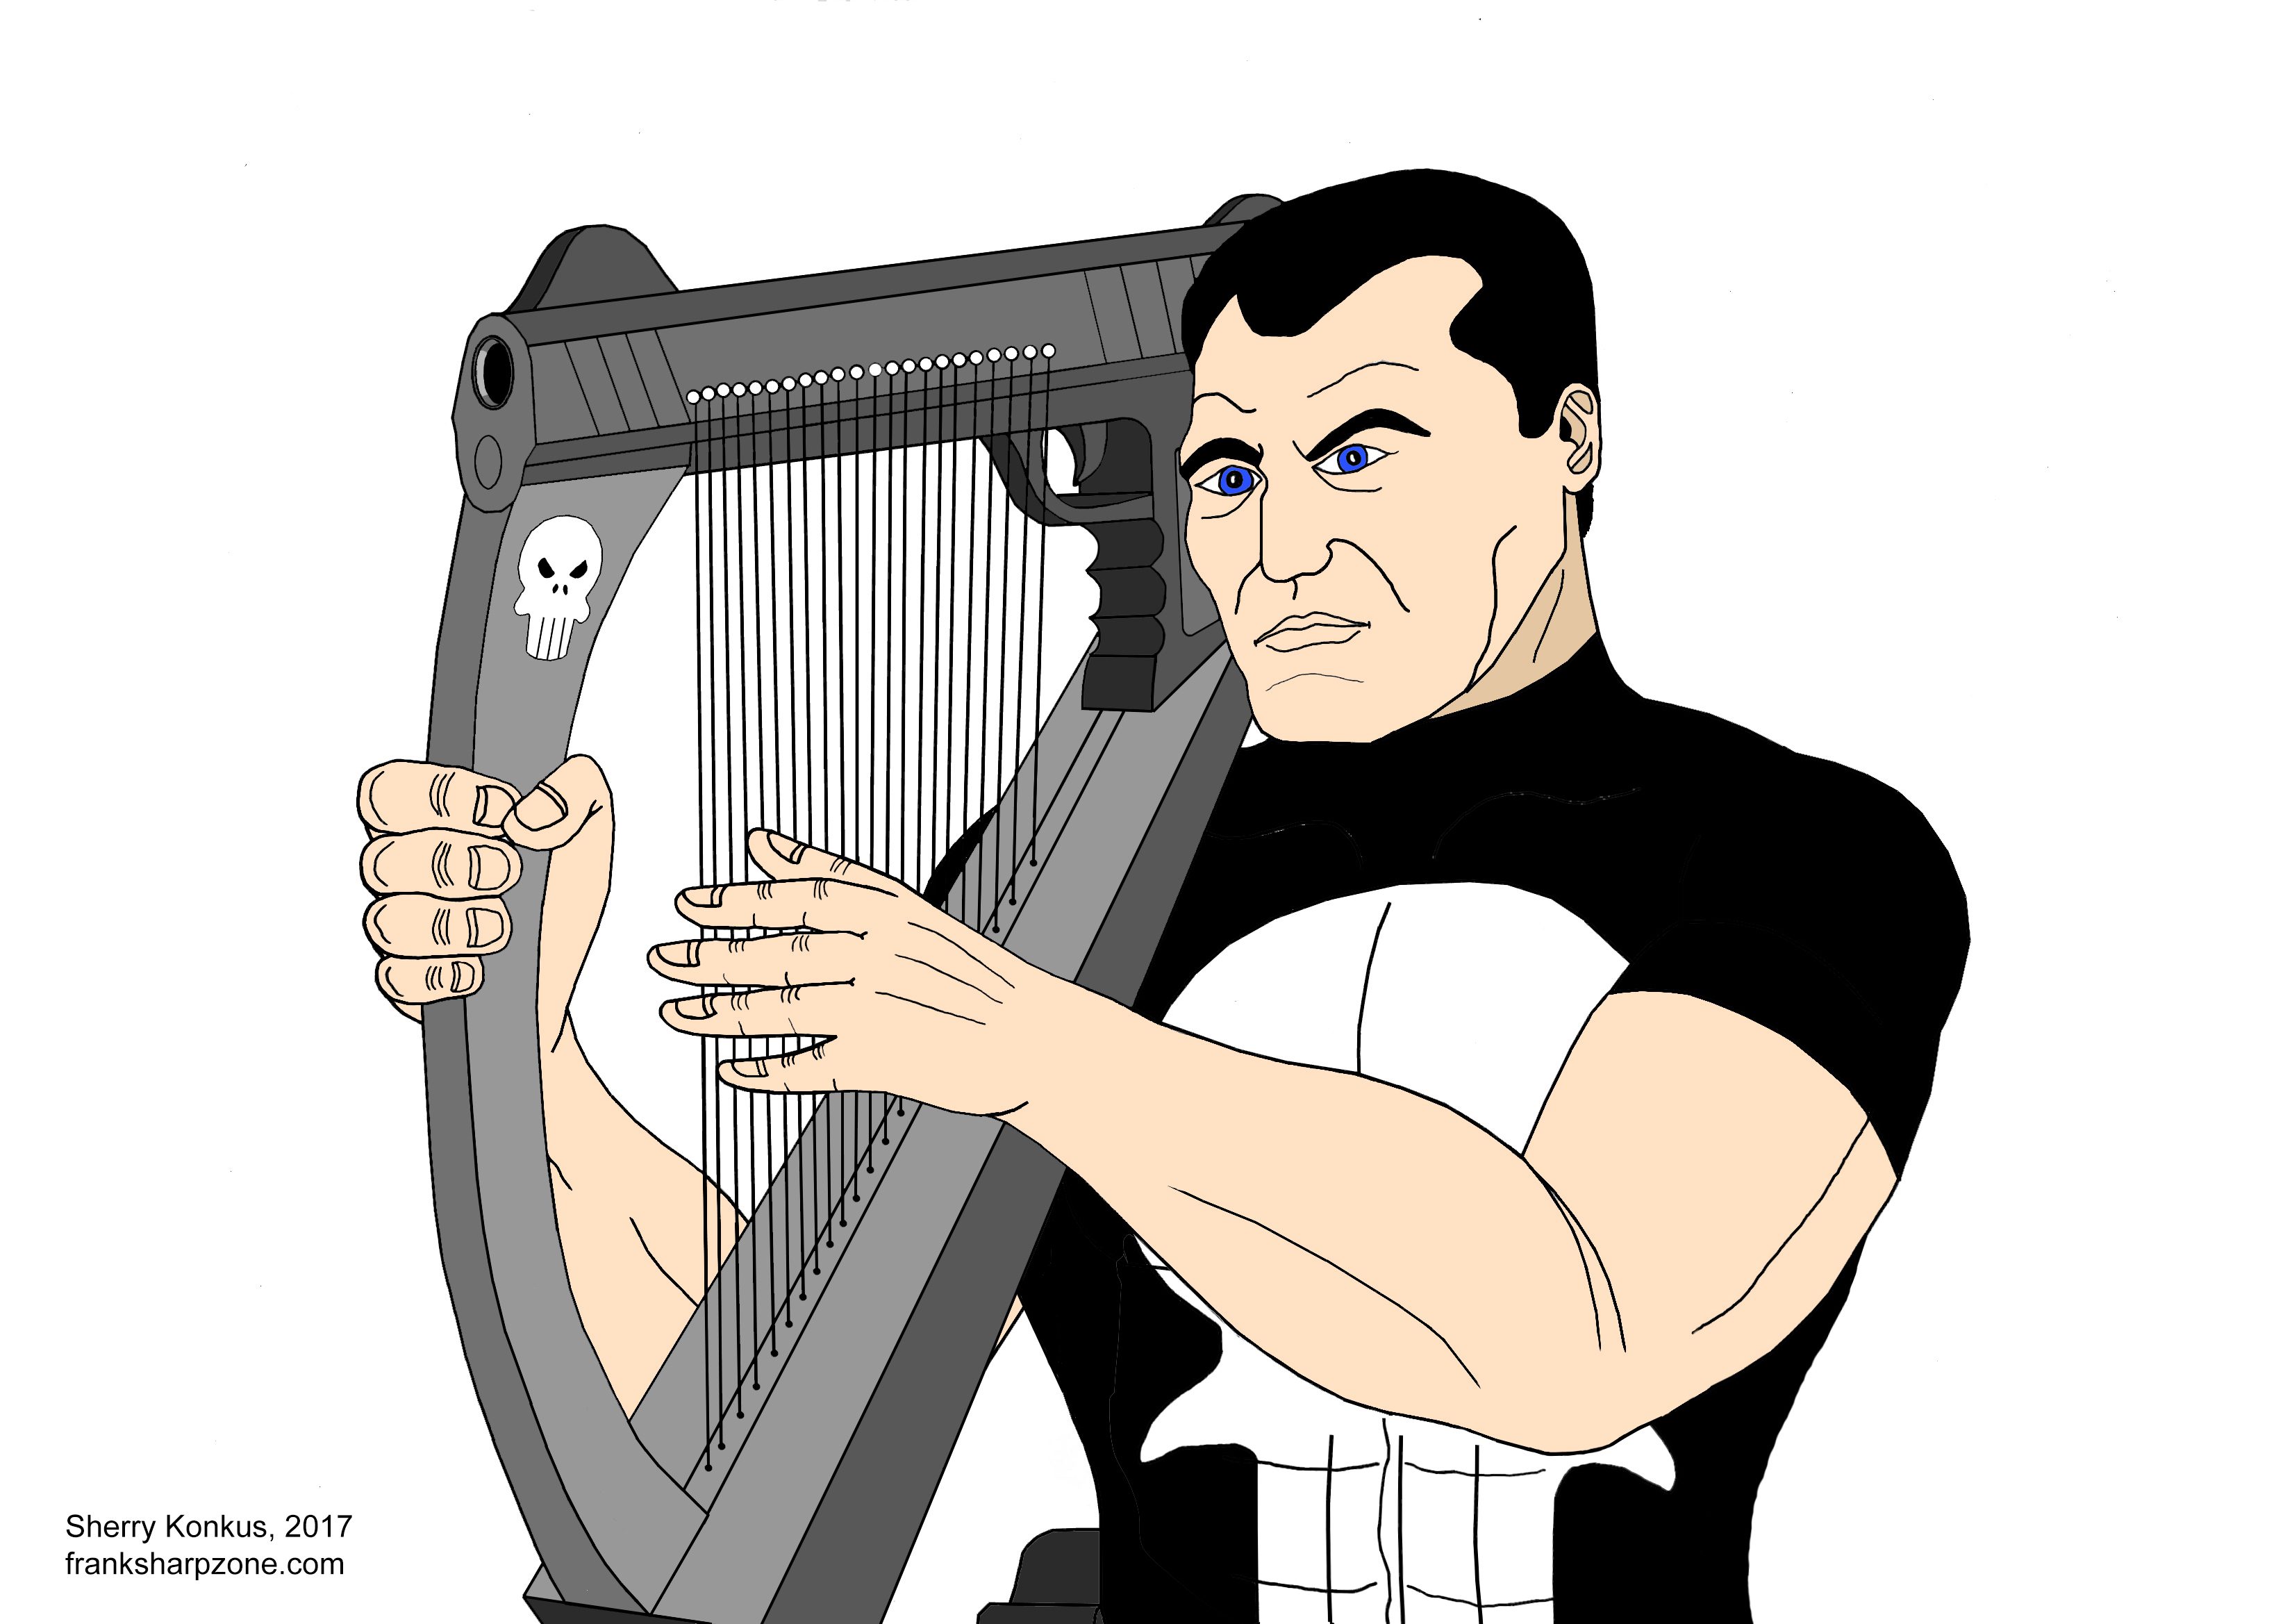 NEW PUNISHER HARP ART: The Song of Death